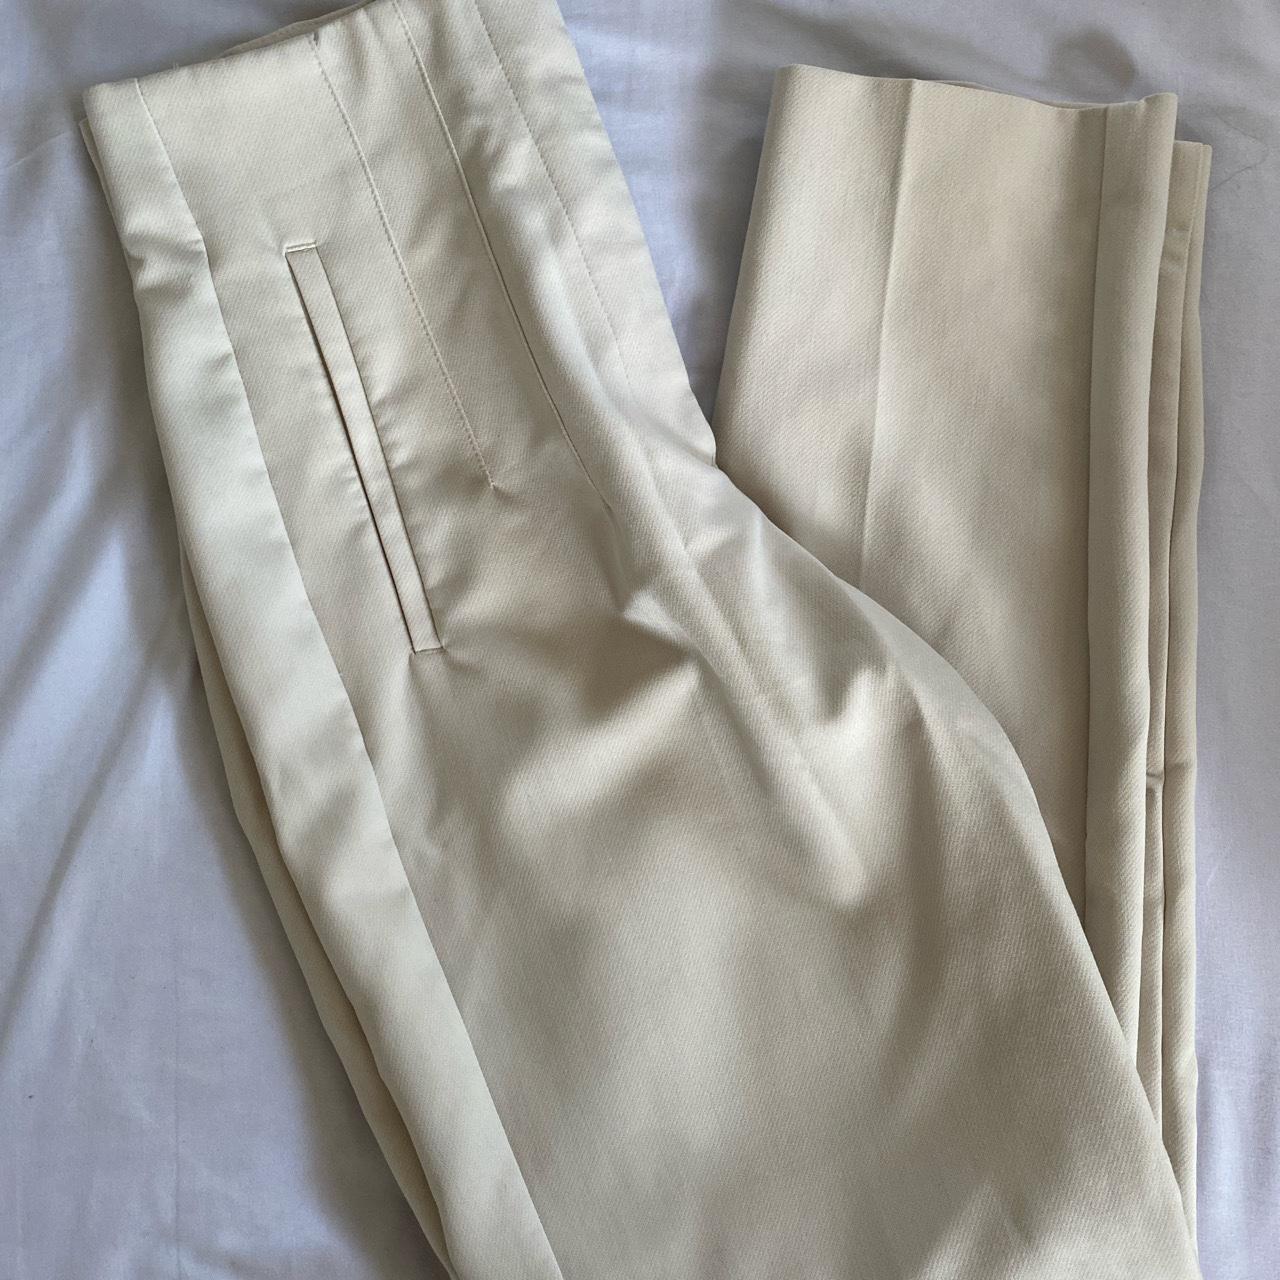 Zara high waisted pants in oyster white size: - Depop